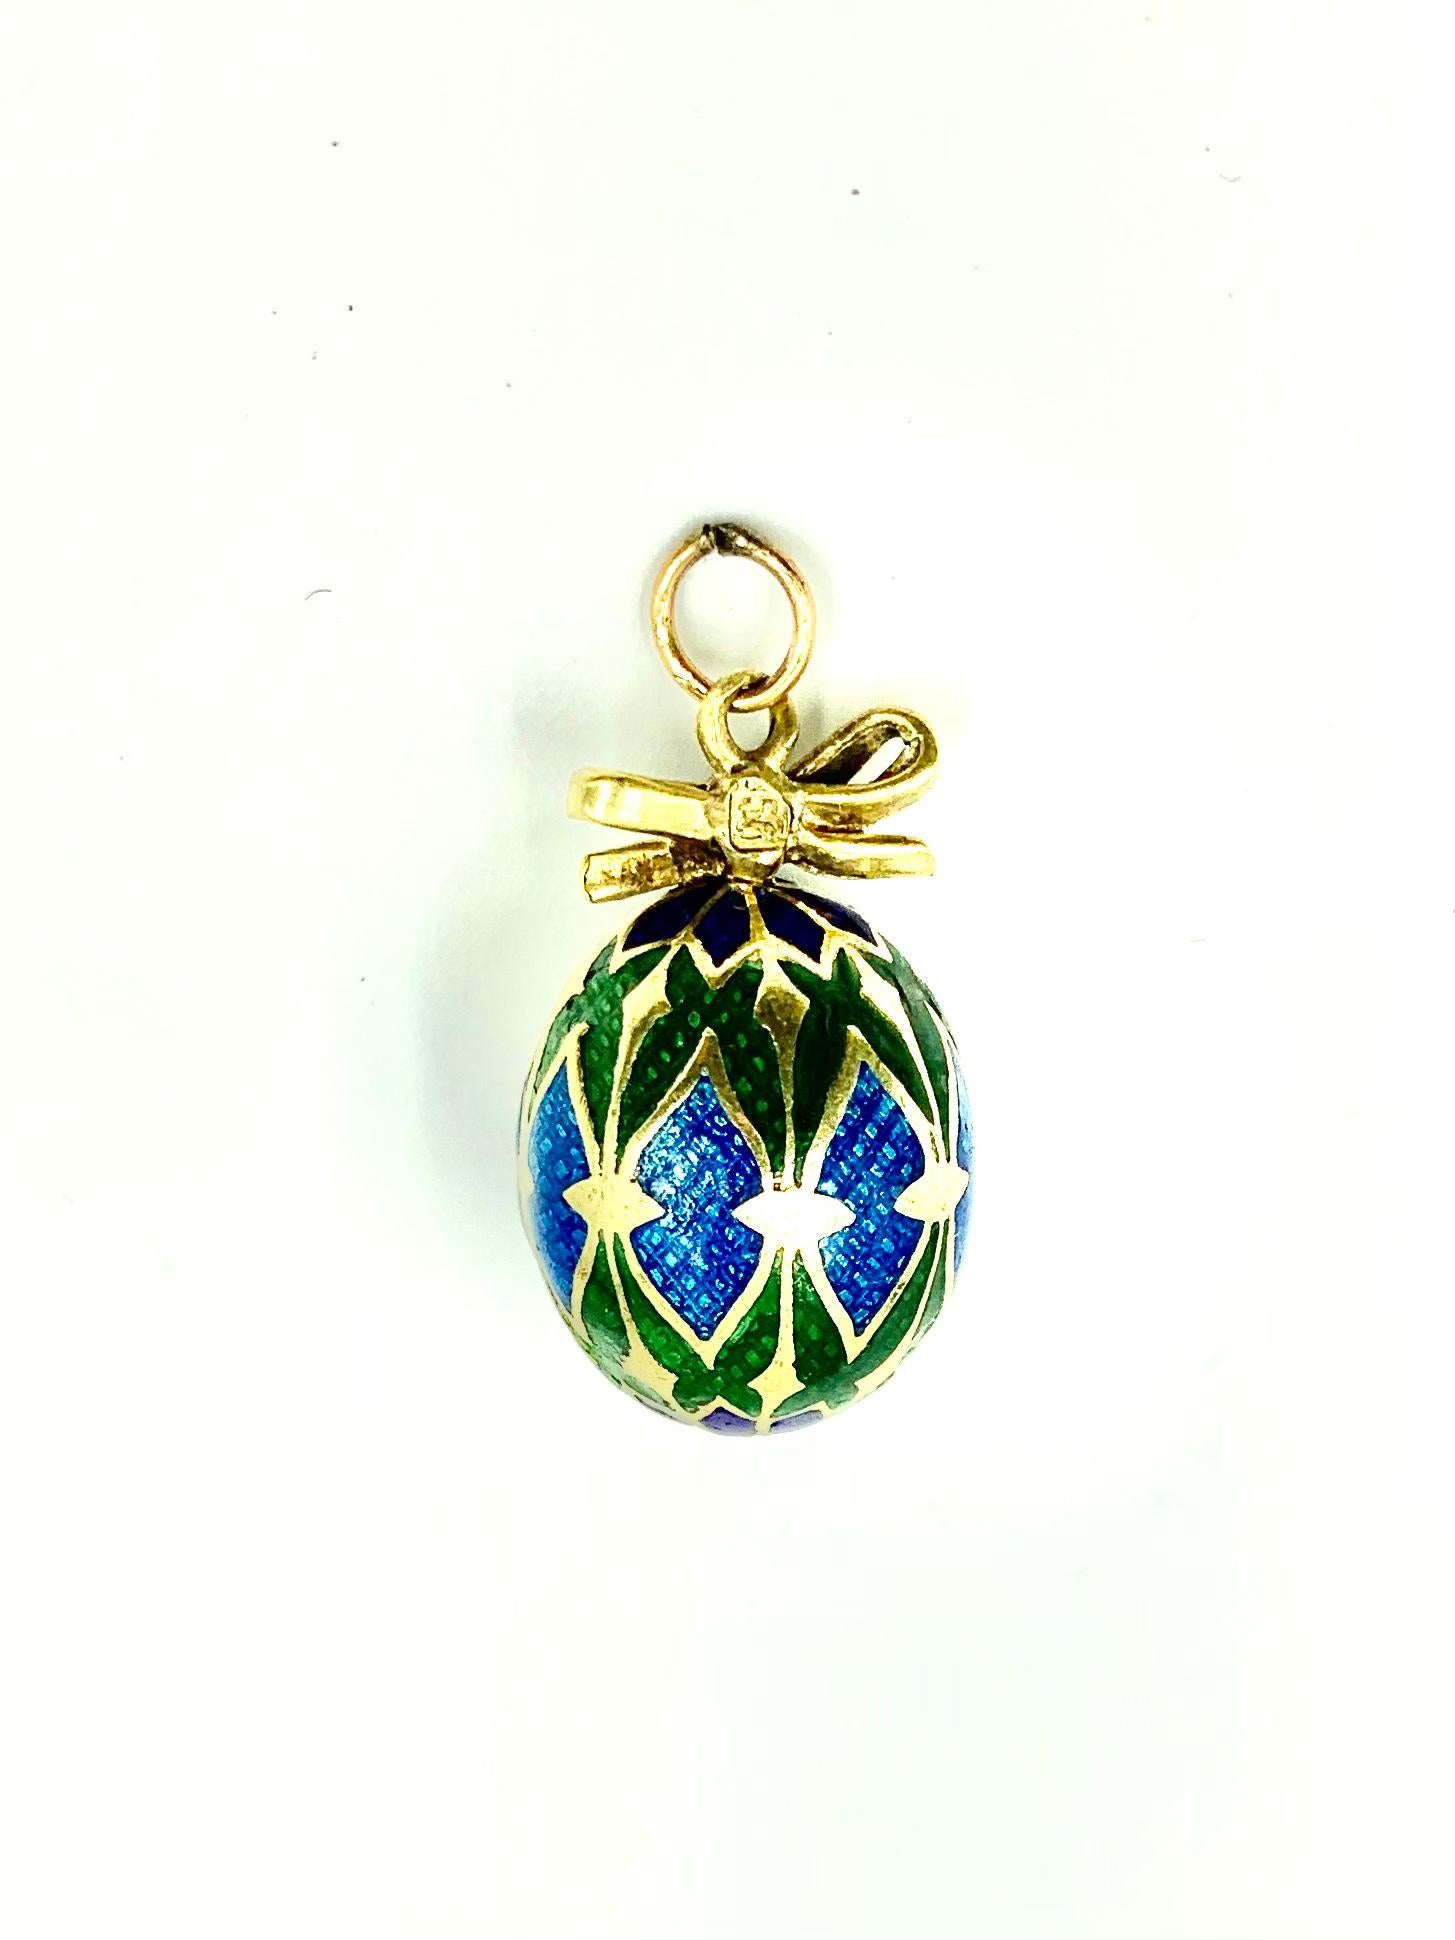 russian faberge egg necklace